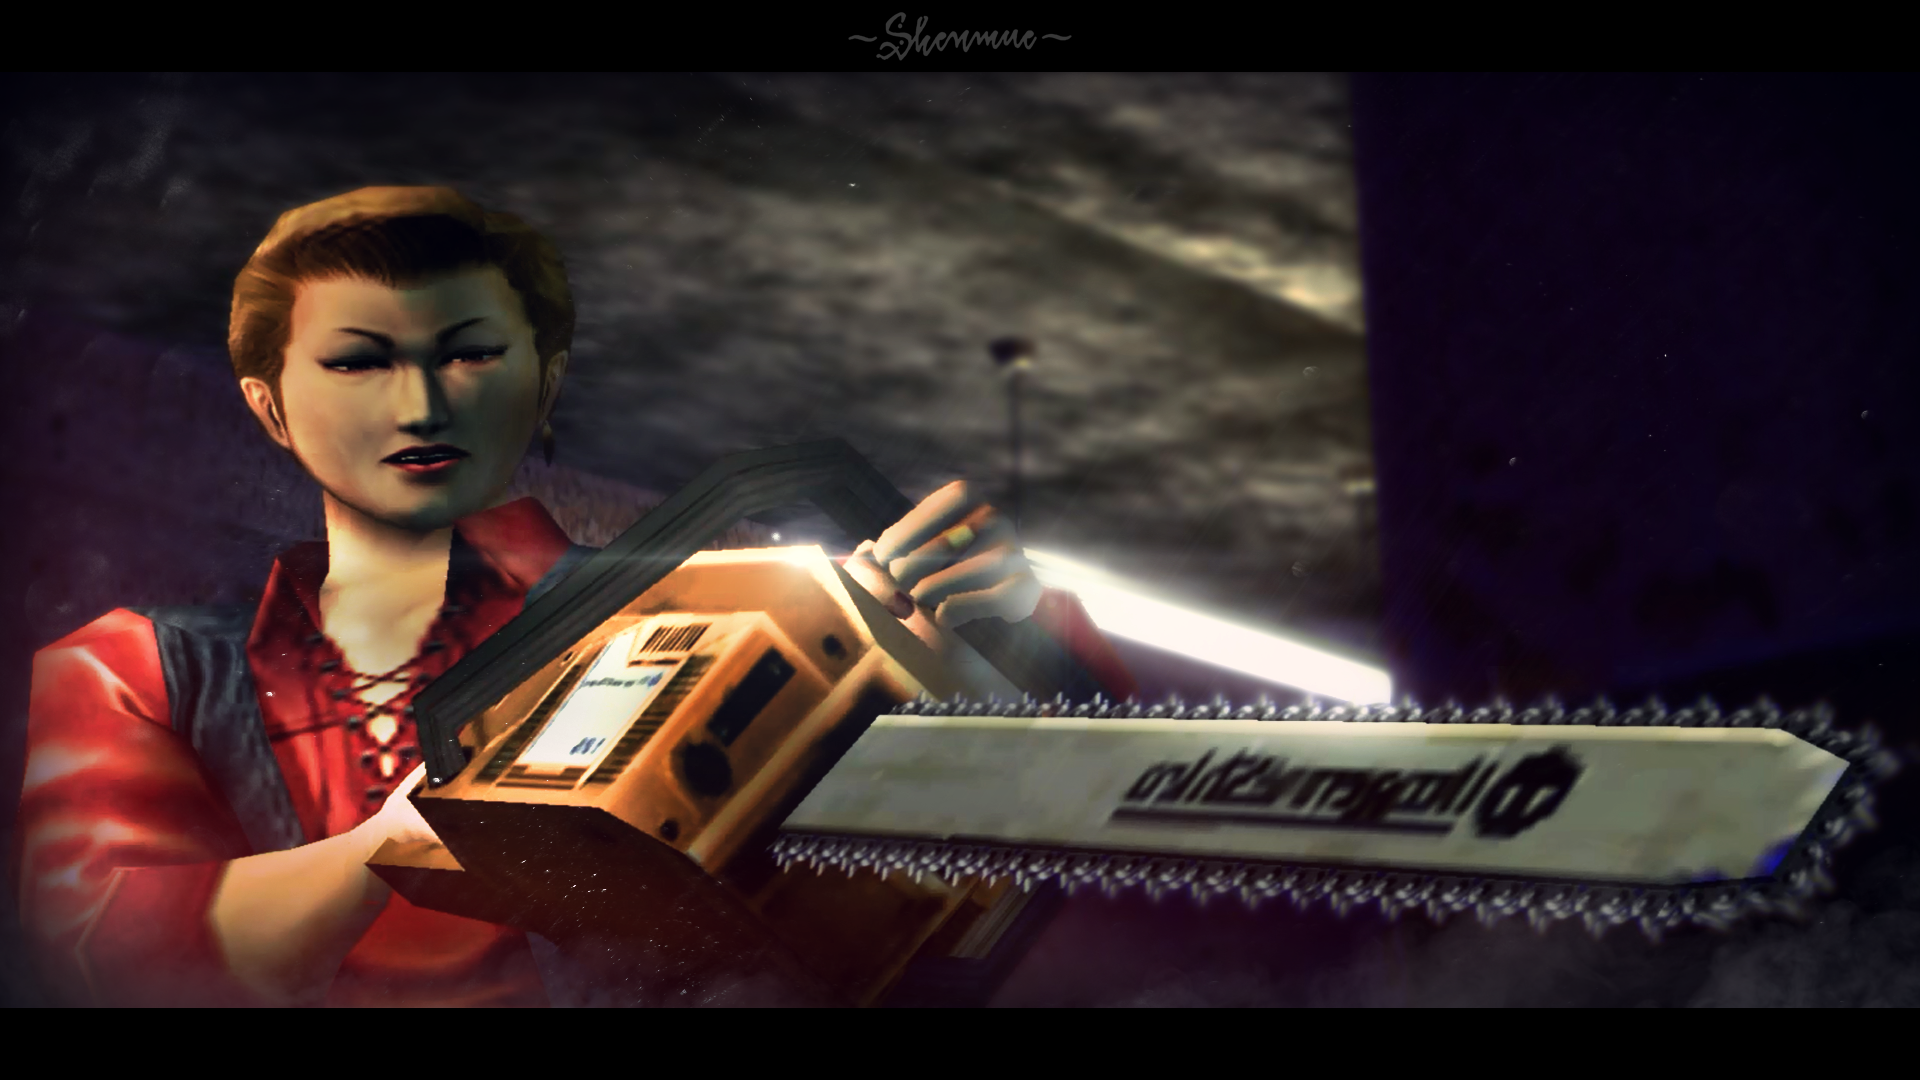 General 1920x1080 shenmue Sega Dreamcast video games chainsaws video game girls screen shot video game characters